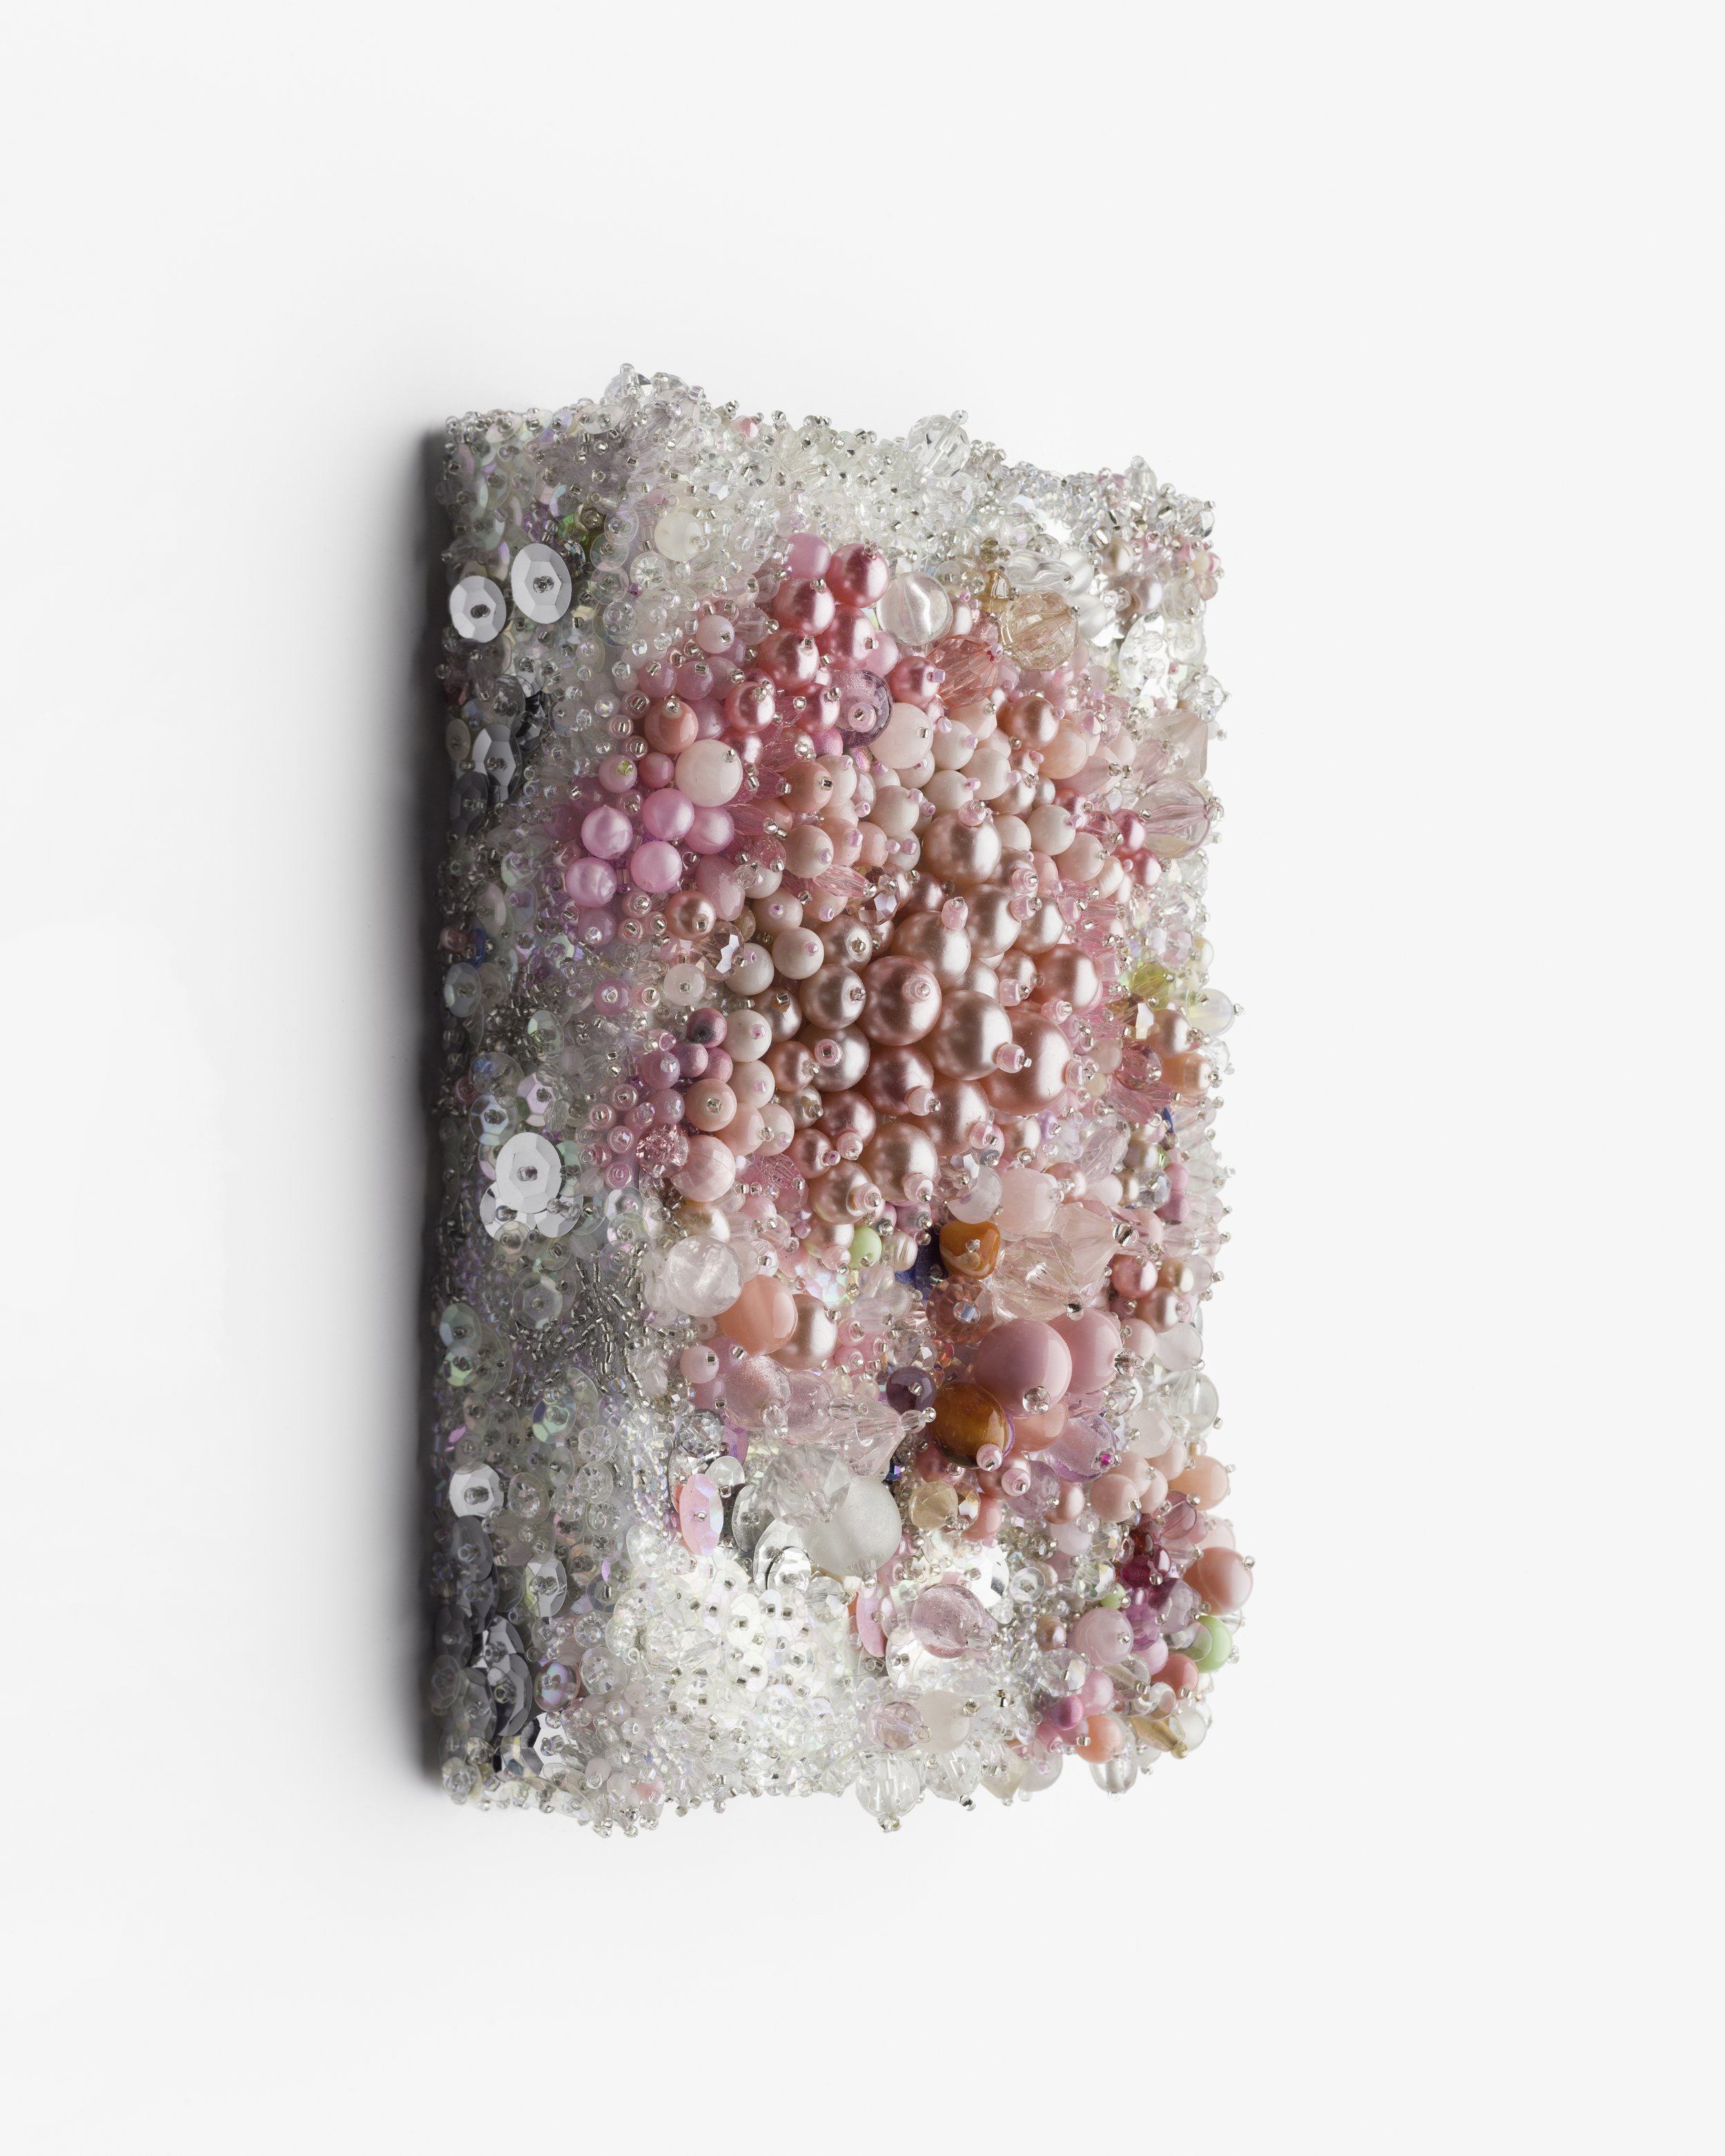   A moment eternal, no. 4 (pink bubble)  (side detail)  2020-2021   Beading of vintage and antique glass, plastic, pearls, swarovski crystal, quartz, rose quartz, coral, agate, moonstone, mother-of-pearl, shell, carnelian,  polyester thread, on synth